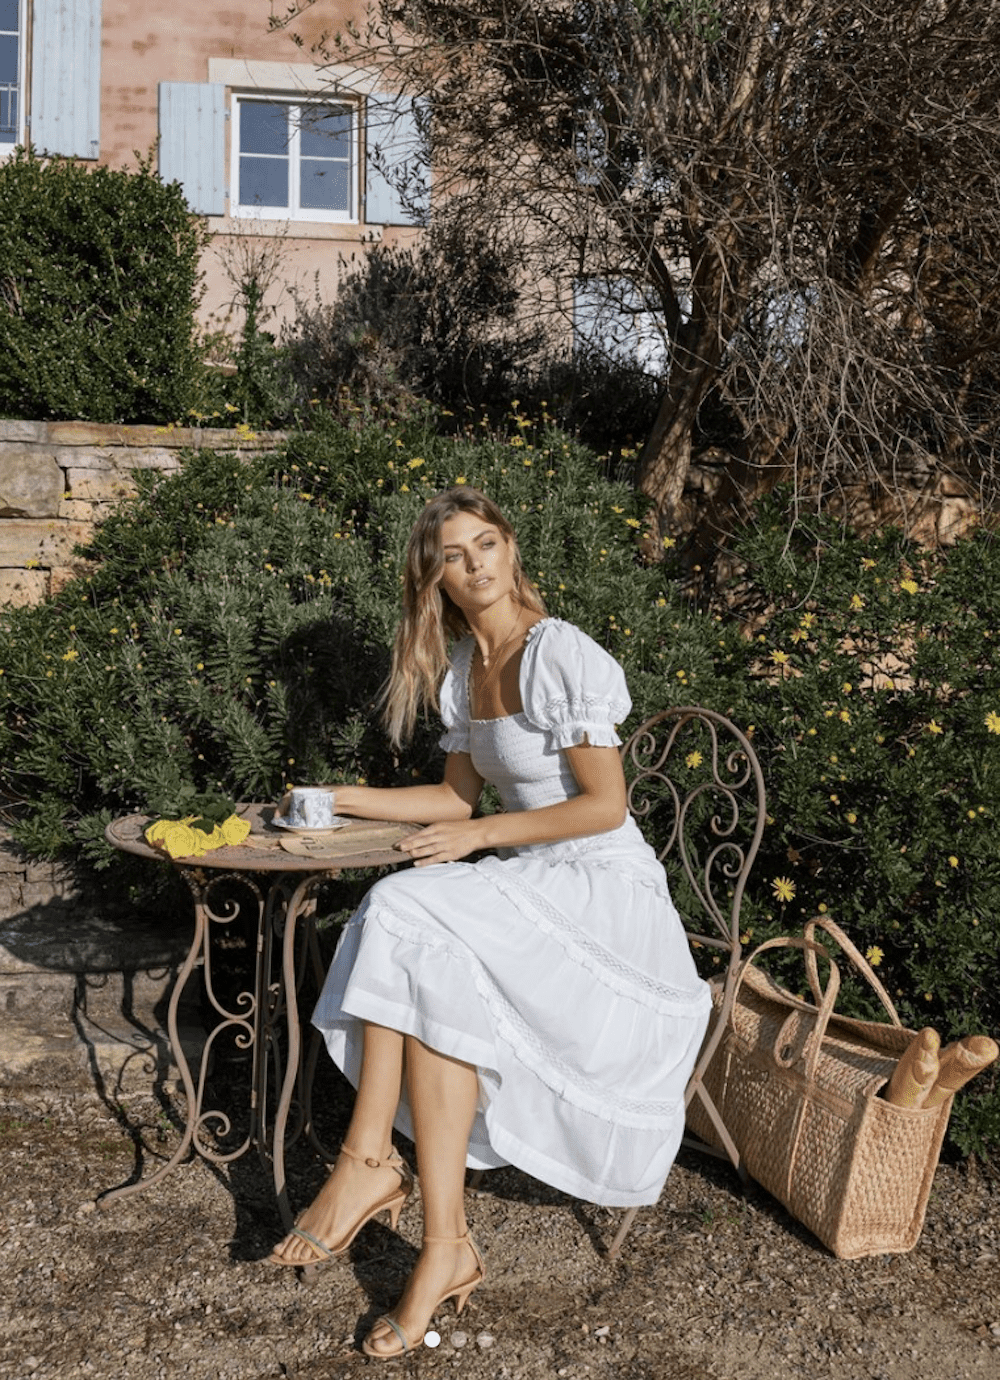 image of a blonde woman sitting at a cafe table outside in a garden wearing a pretty white dress